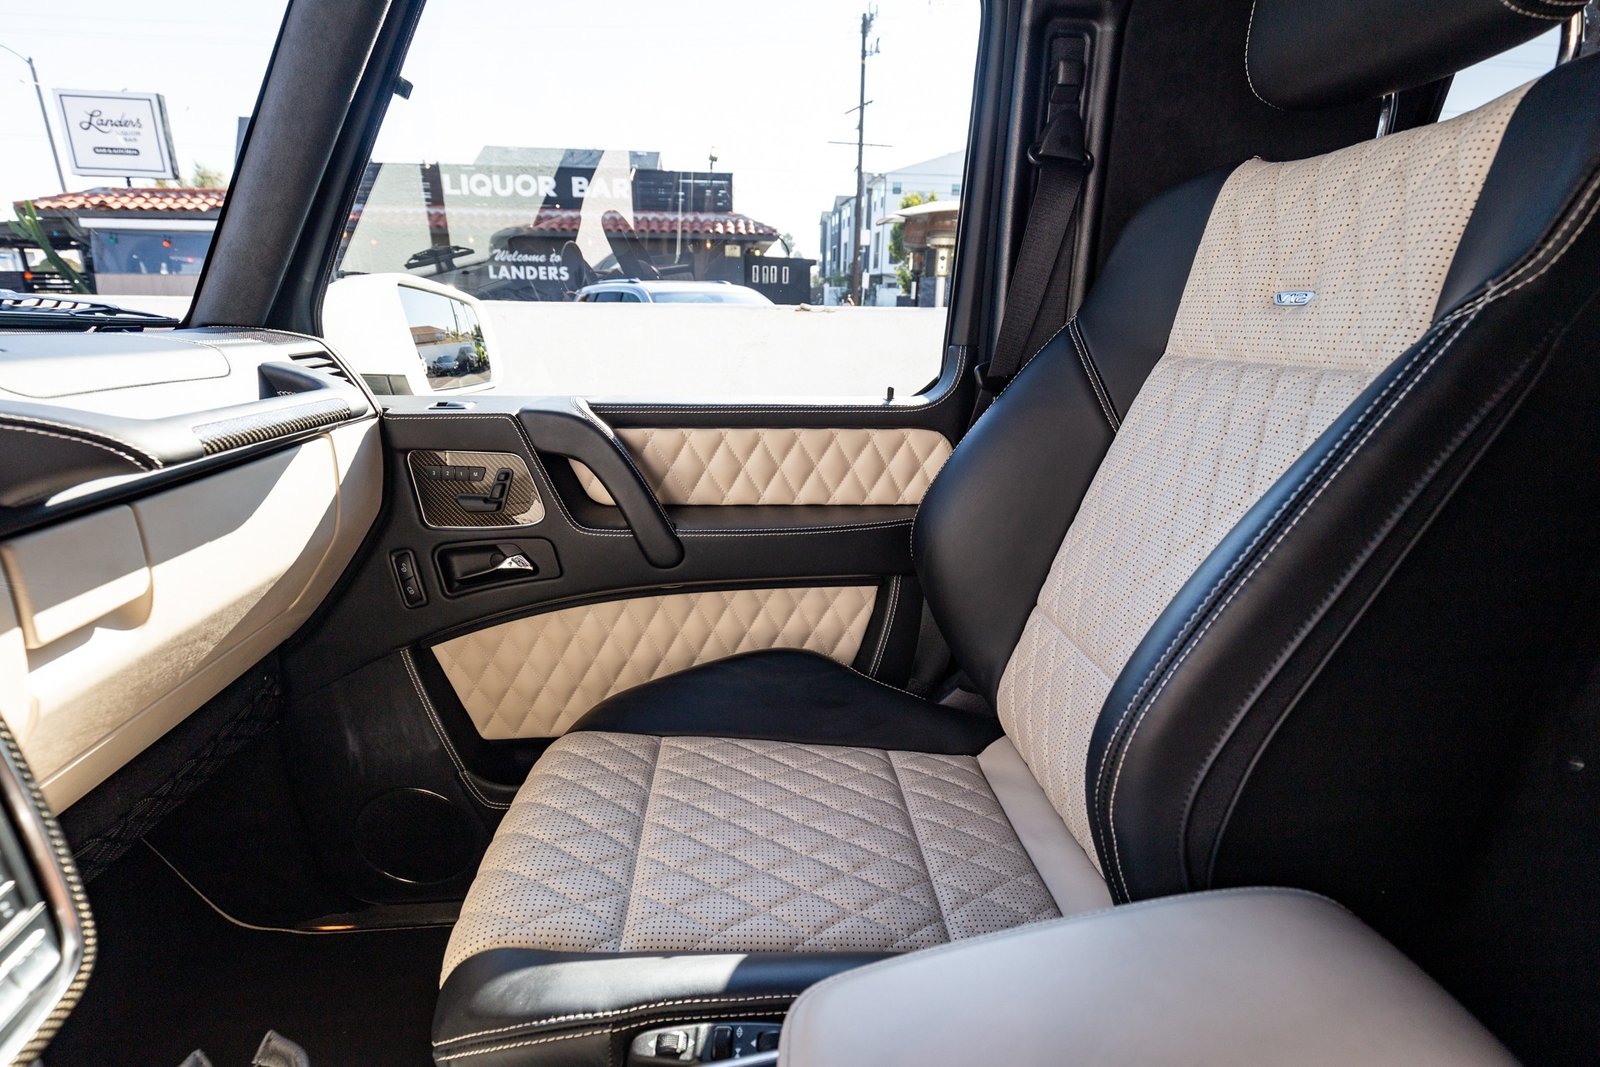 Used 2018 Mercedes-Benz G650 Maybach (74)